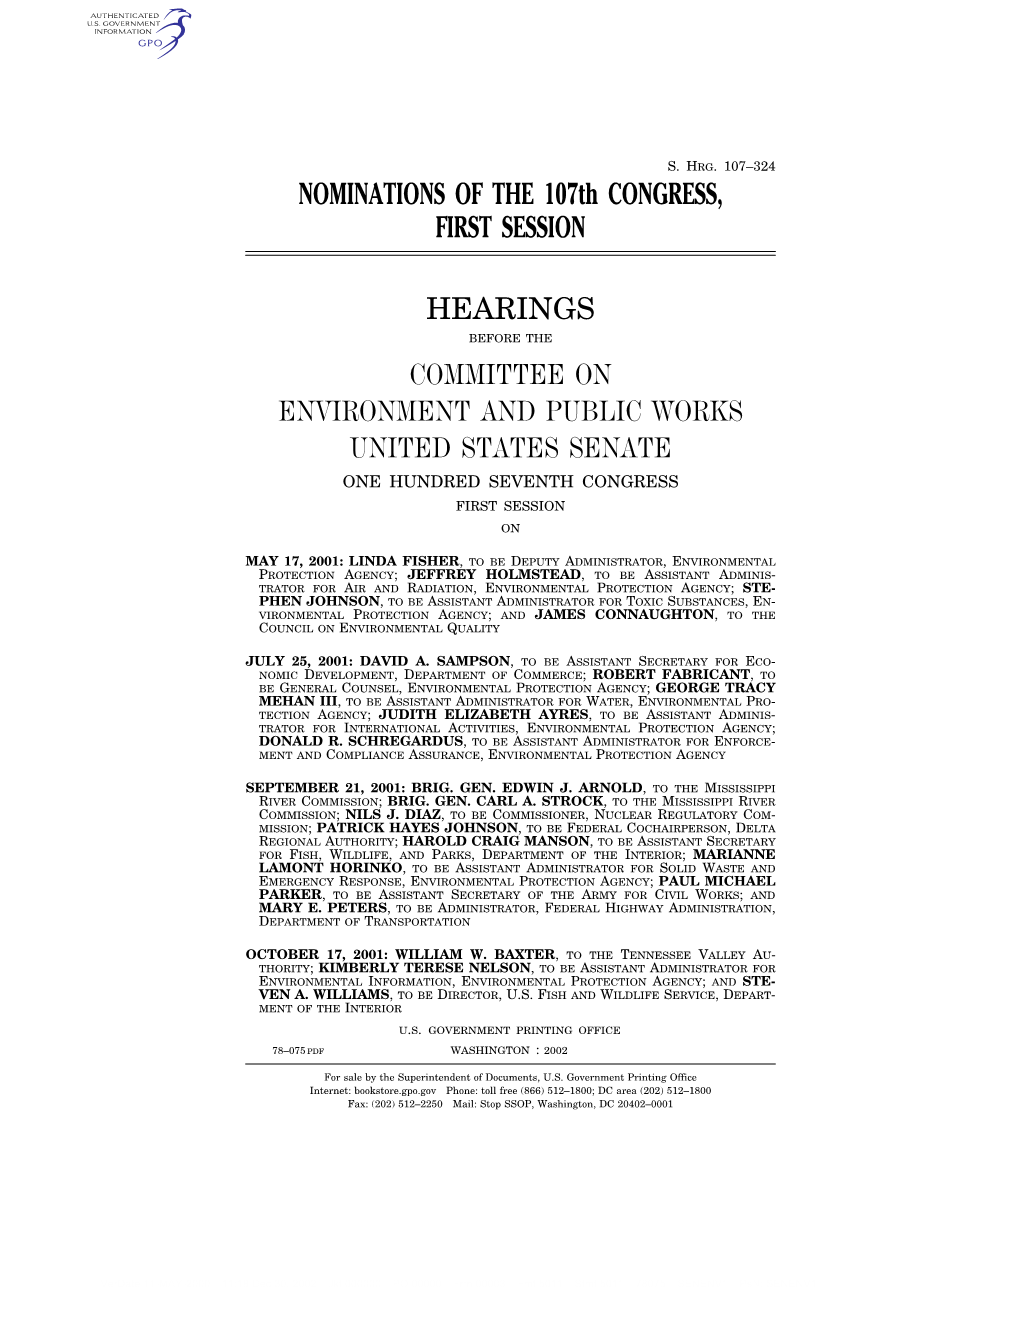 NOMINATIONS of the 107Th CONGRESS, FIRST SESSION